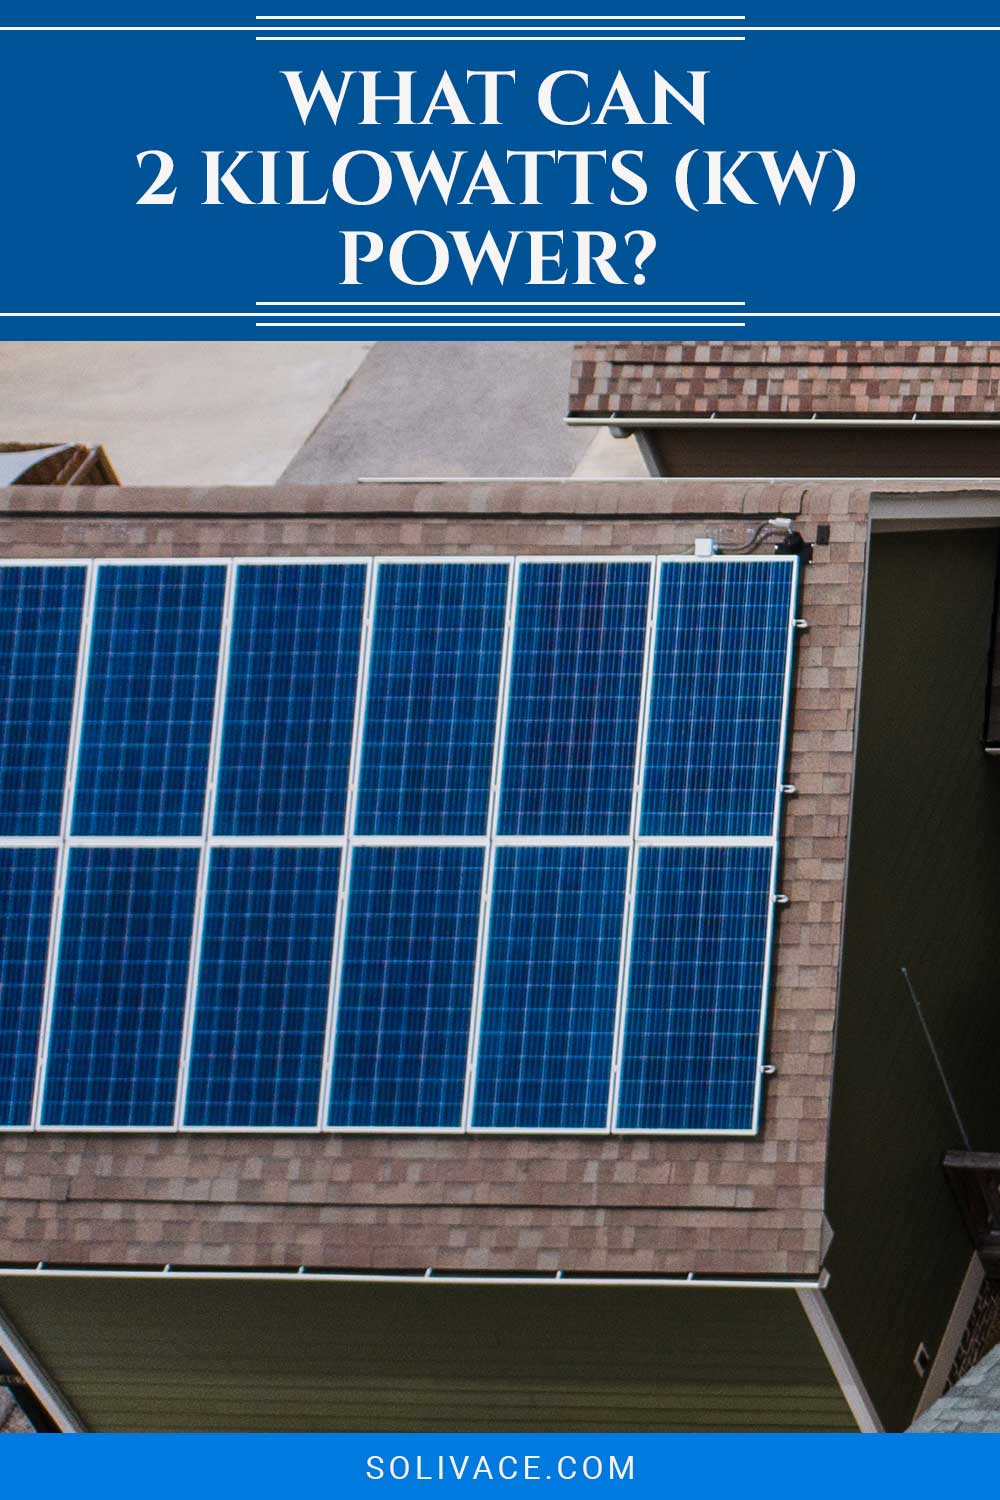 What Can 2 Kilowatts (KW) Power?